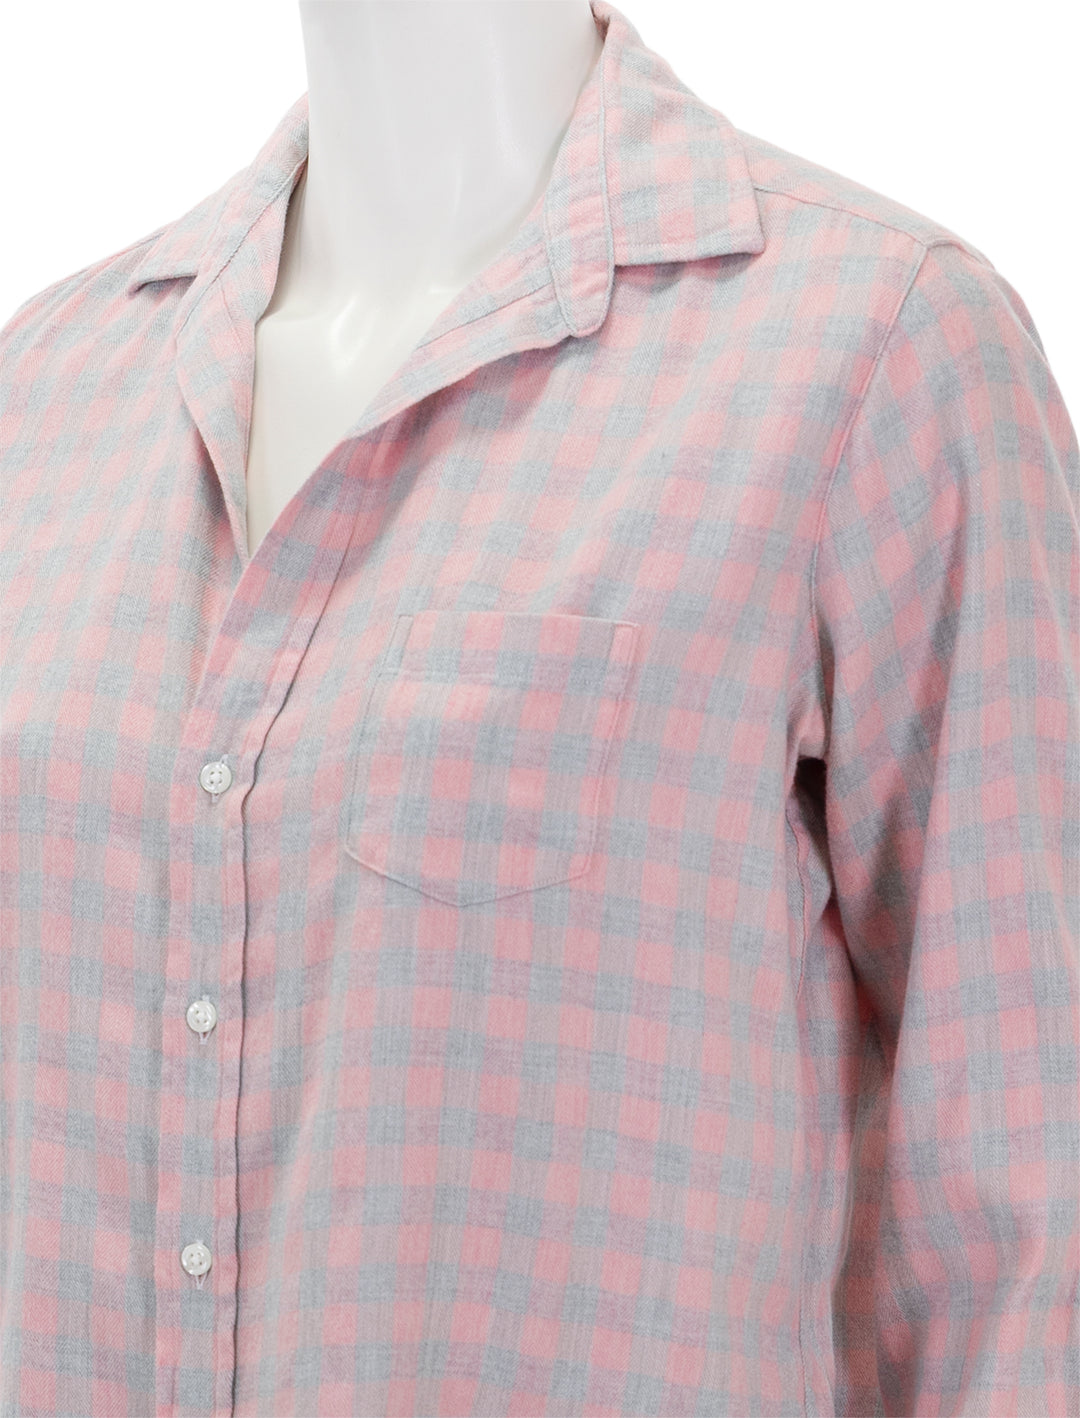 Close-up view of Frank & Eileen's eileen in grey and pink check flannel.